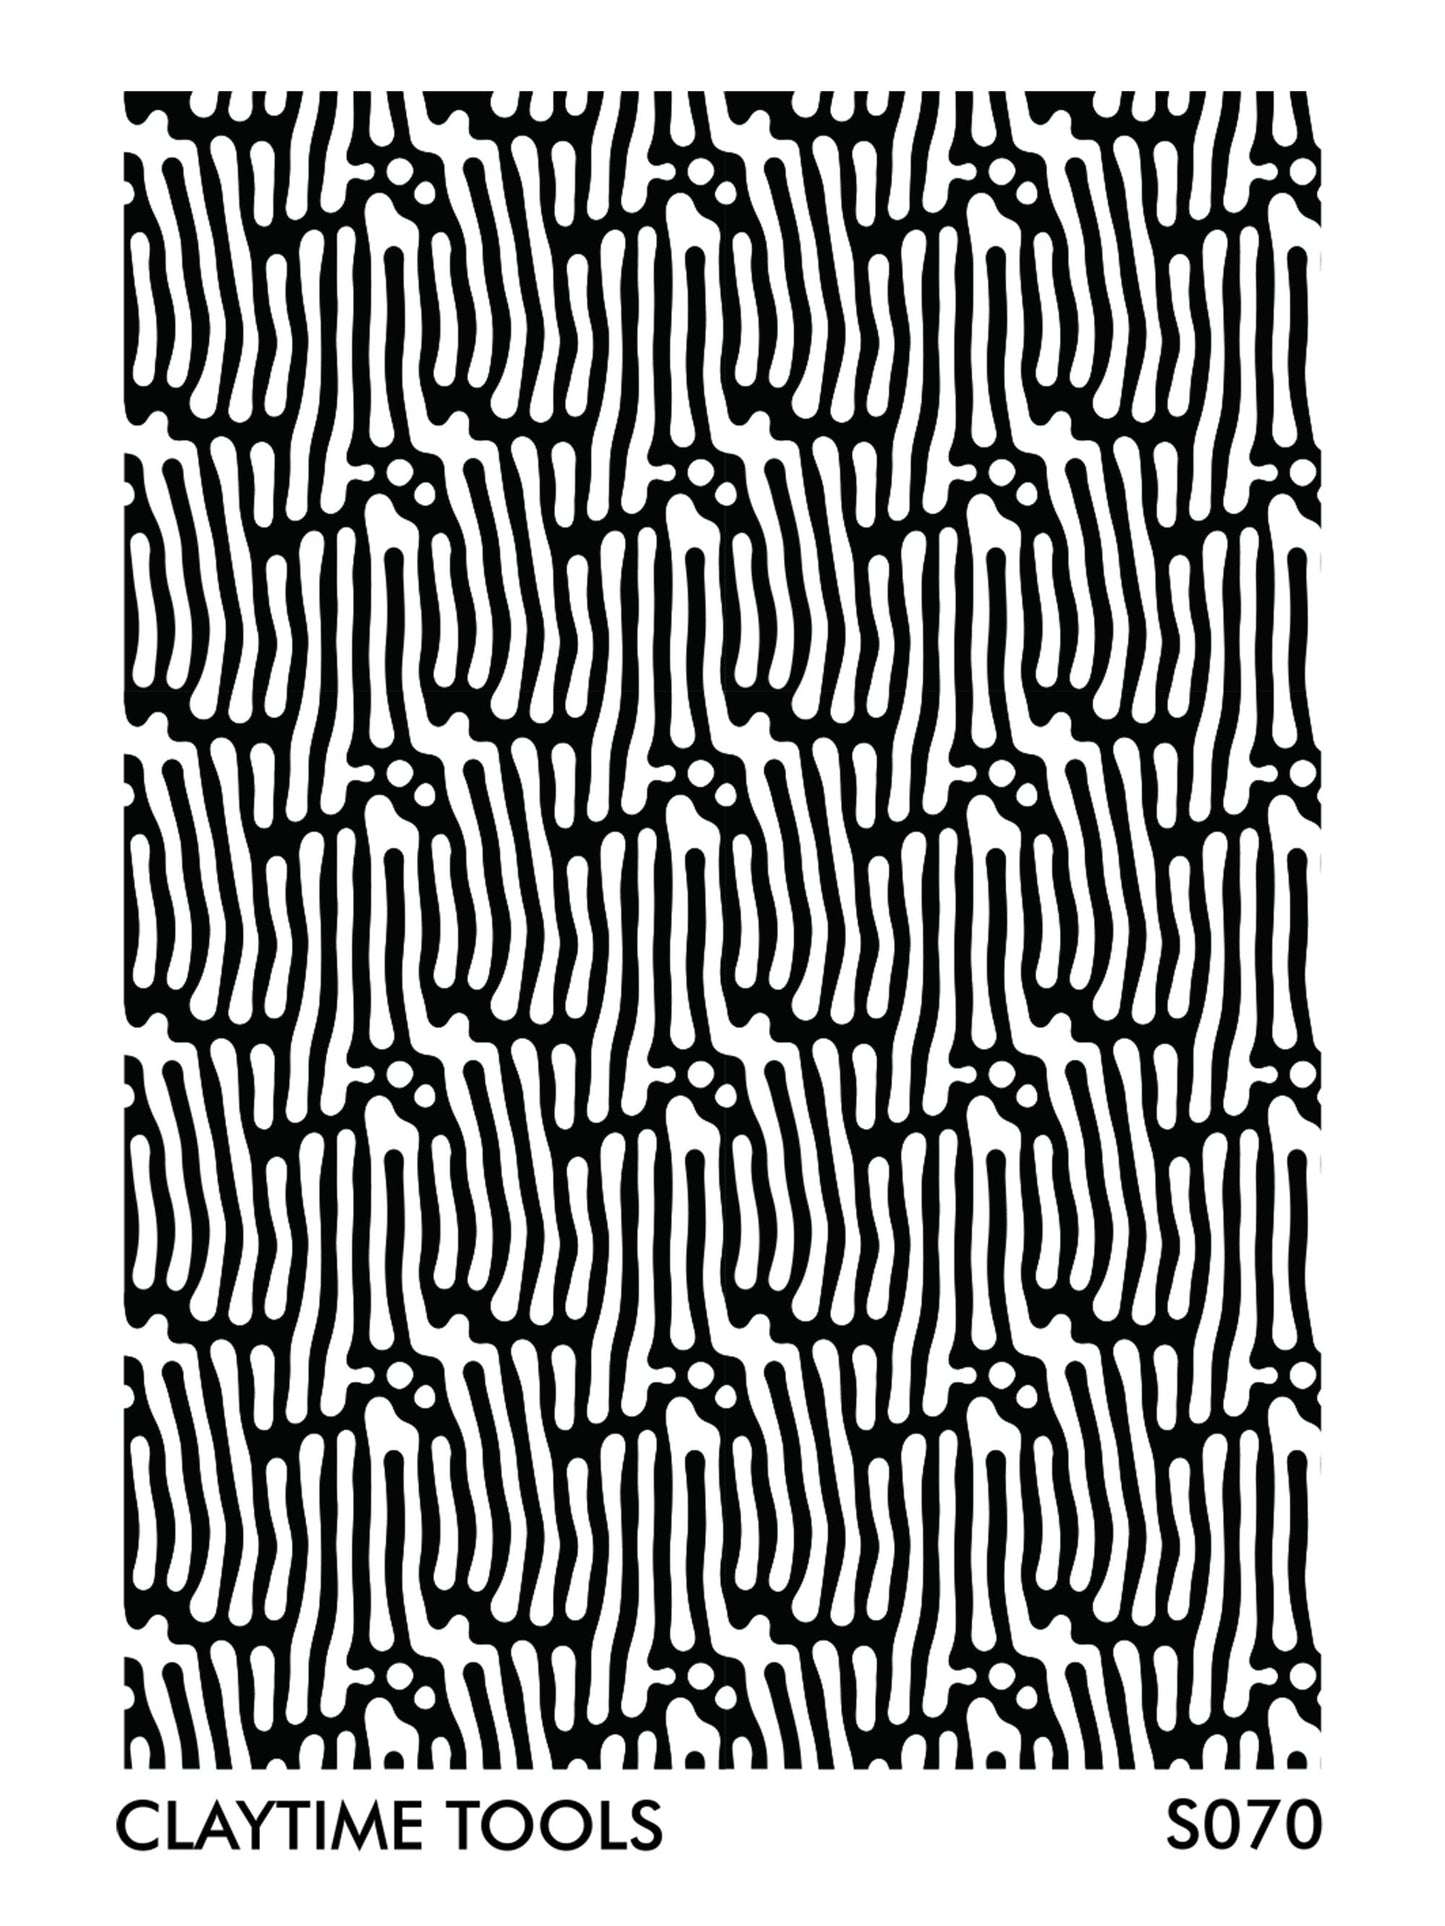 Image of a silkscreen print featuring abstract, organic patterns.